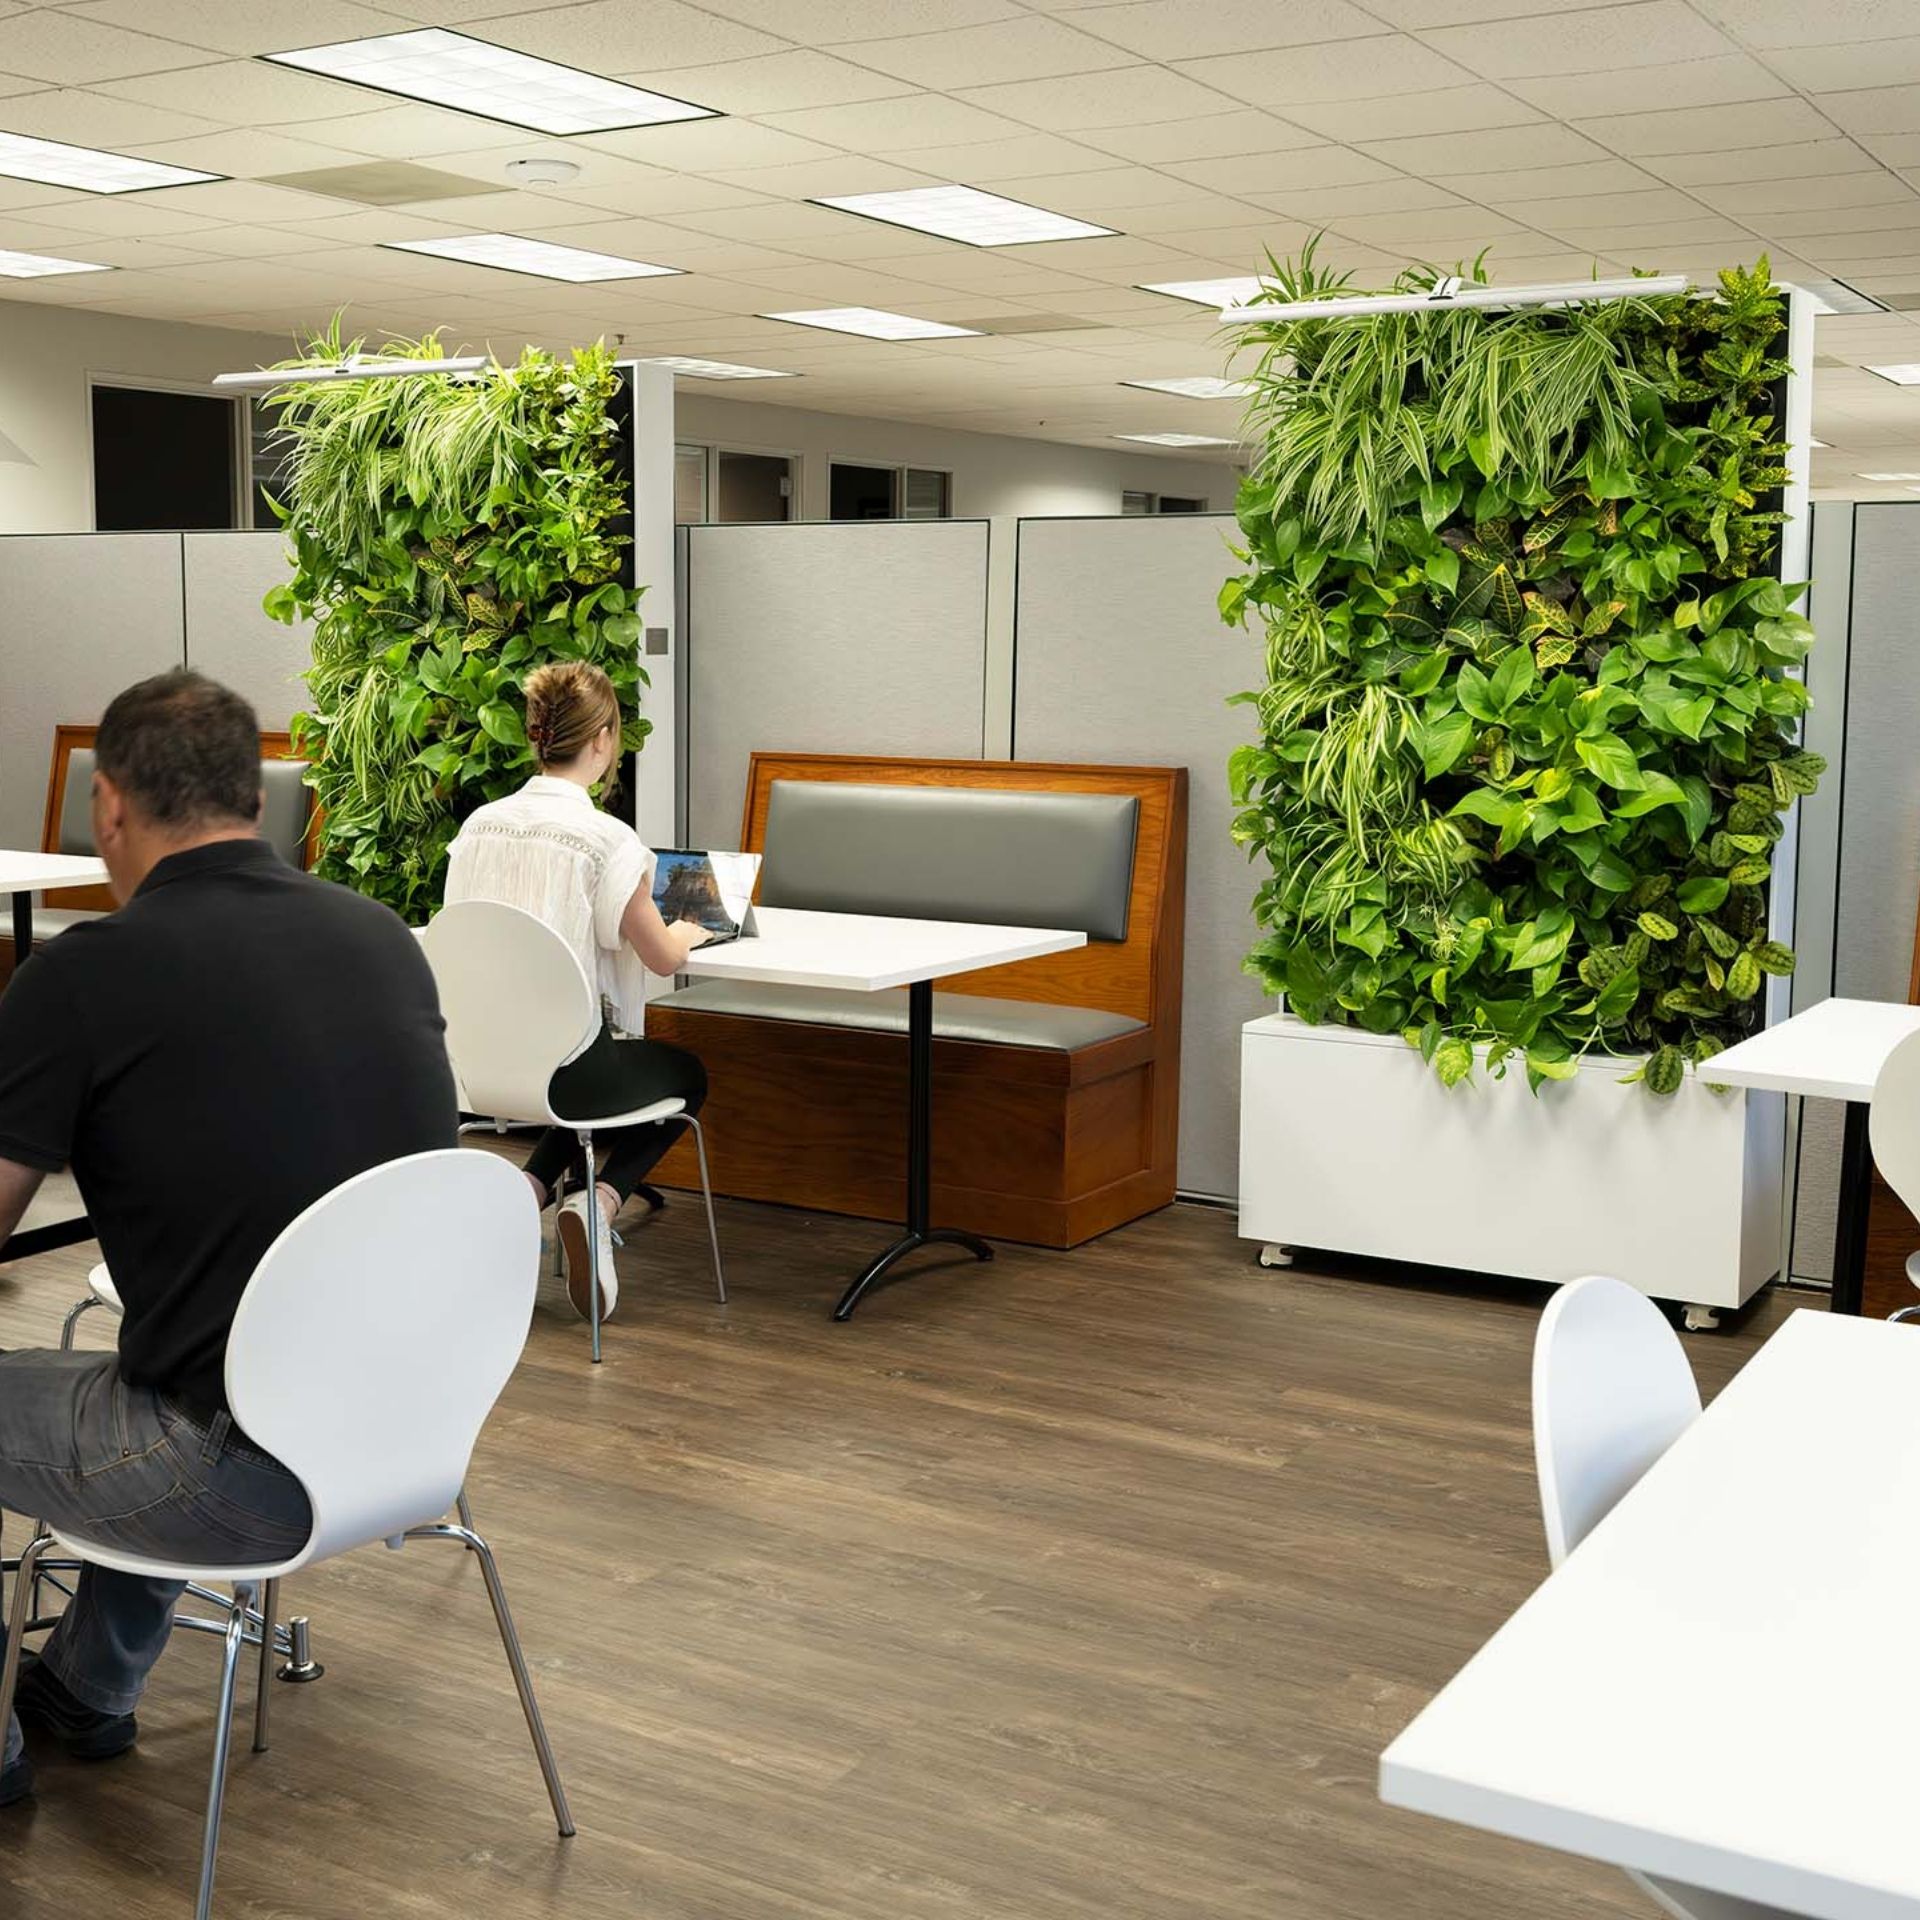 Free standing large living wall in an office